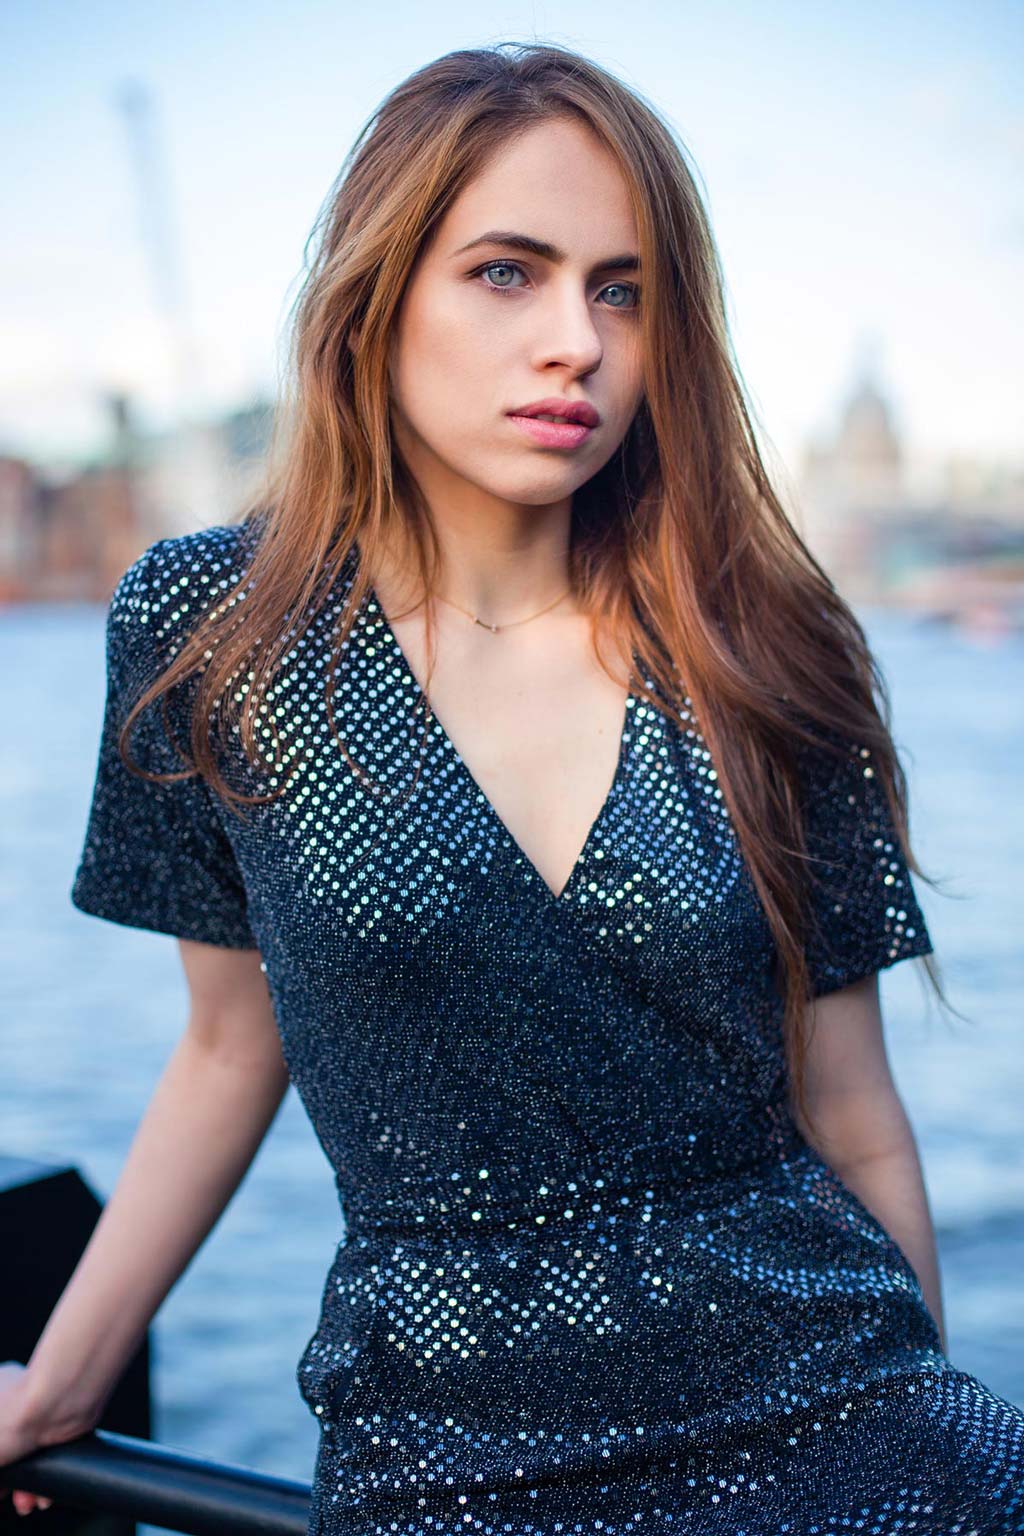 A pretty girl on a sequin dress against the river Thames in London, fashion photography by Nukemedia